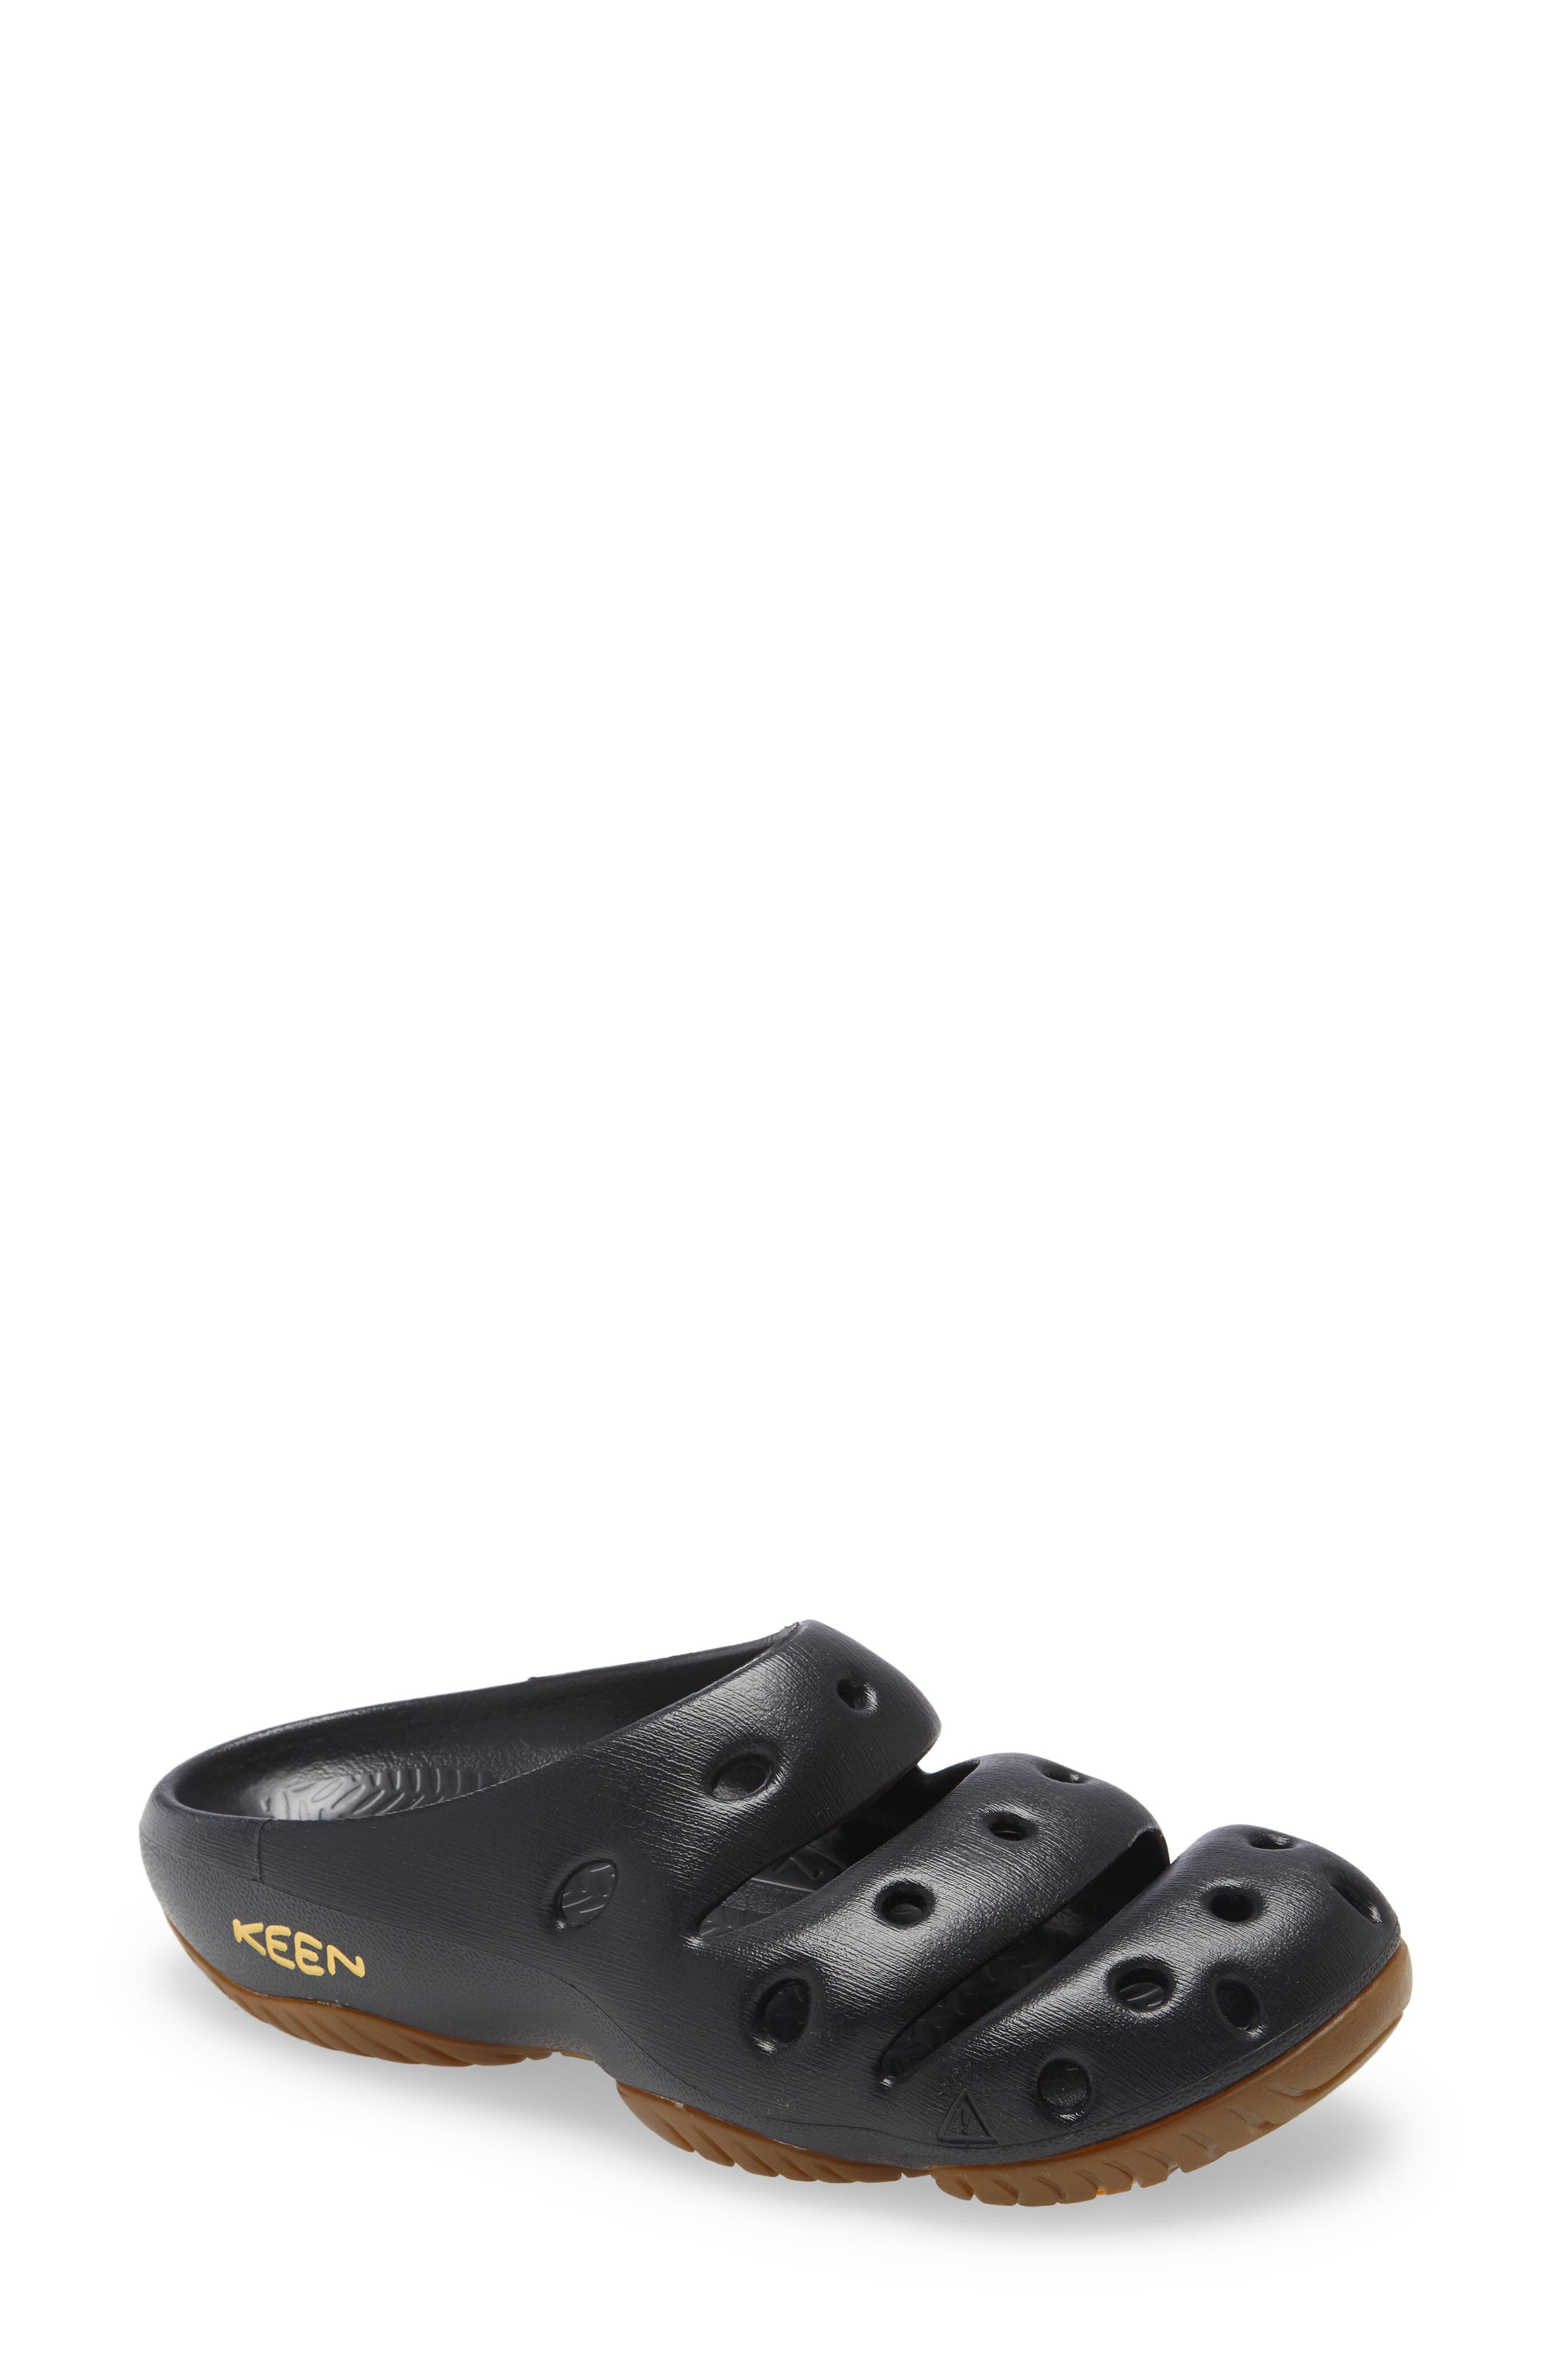 UPC 871209010967 product image for KEEN Yogui Slip-On, Size 11 in Black at Nordstrom | upcitemdb.com